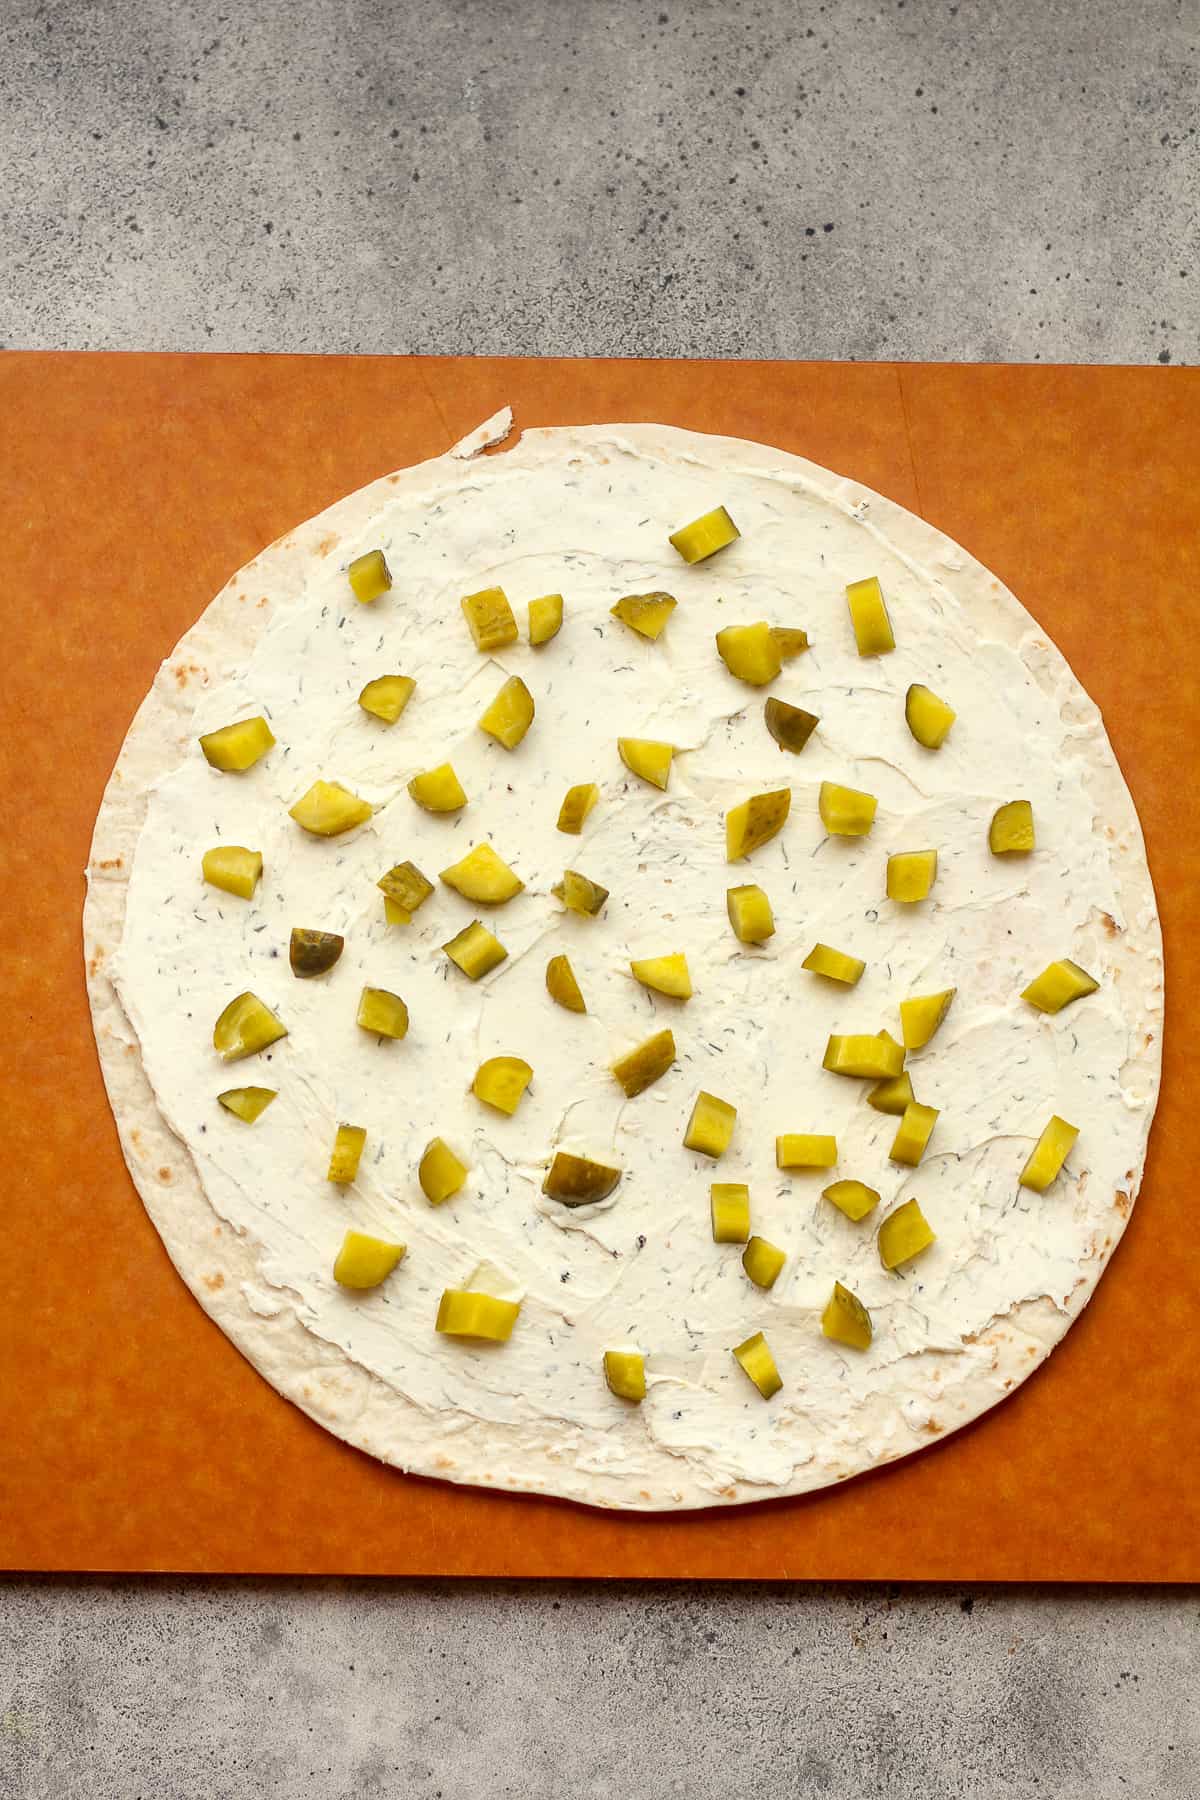 A large tortilla with cream cheese spread on top plus dill pickle pieces.